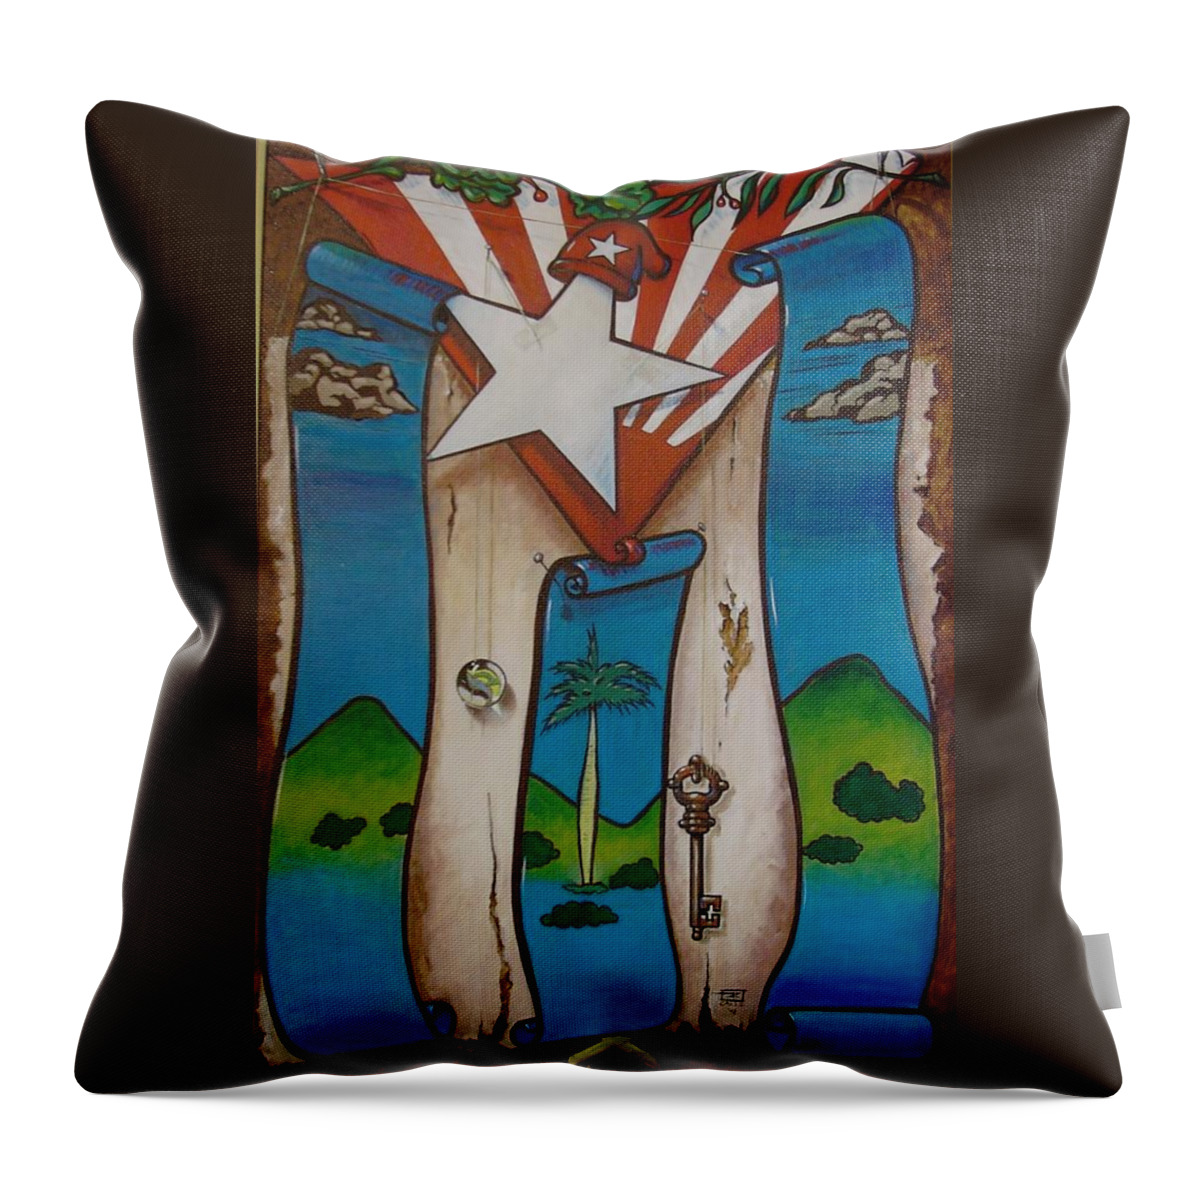 Cuba Throw Pillow featuring the painting Hasta Cuando? by Roger Calle